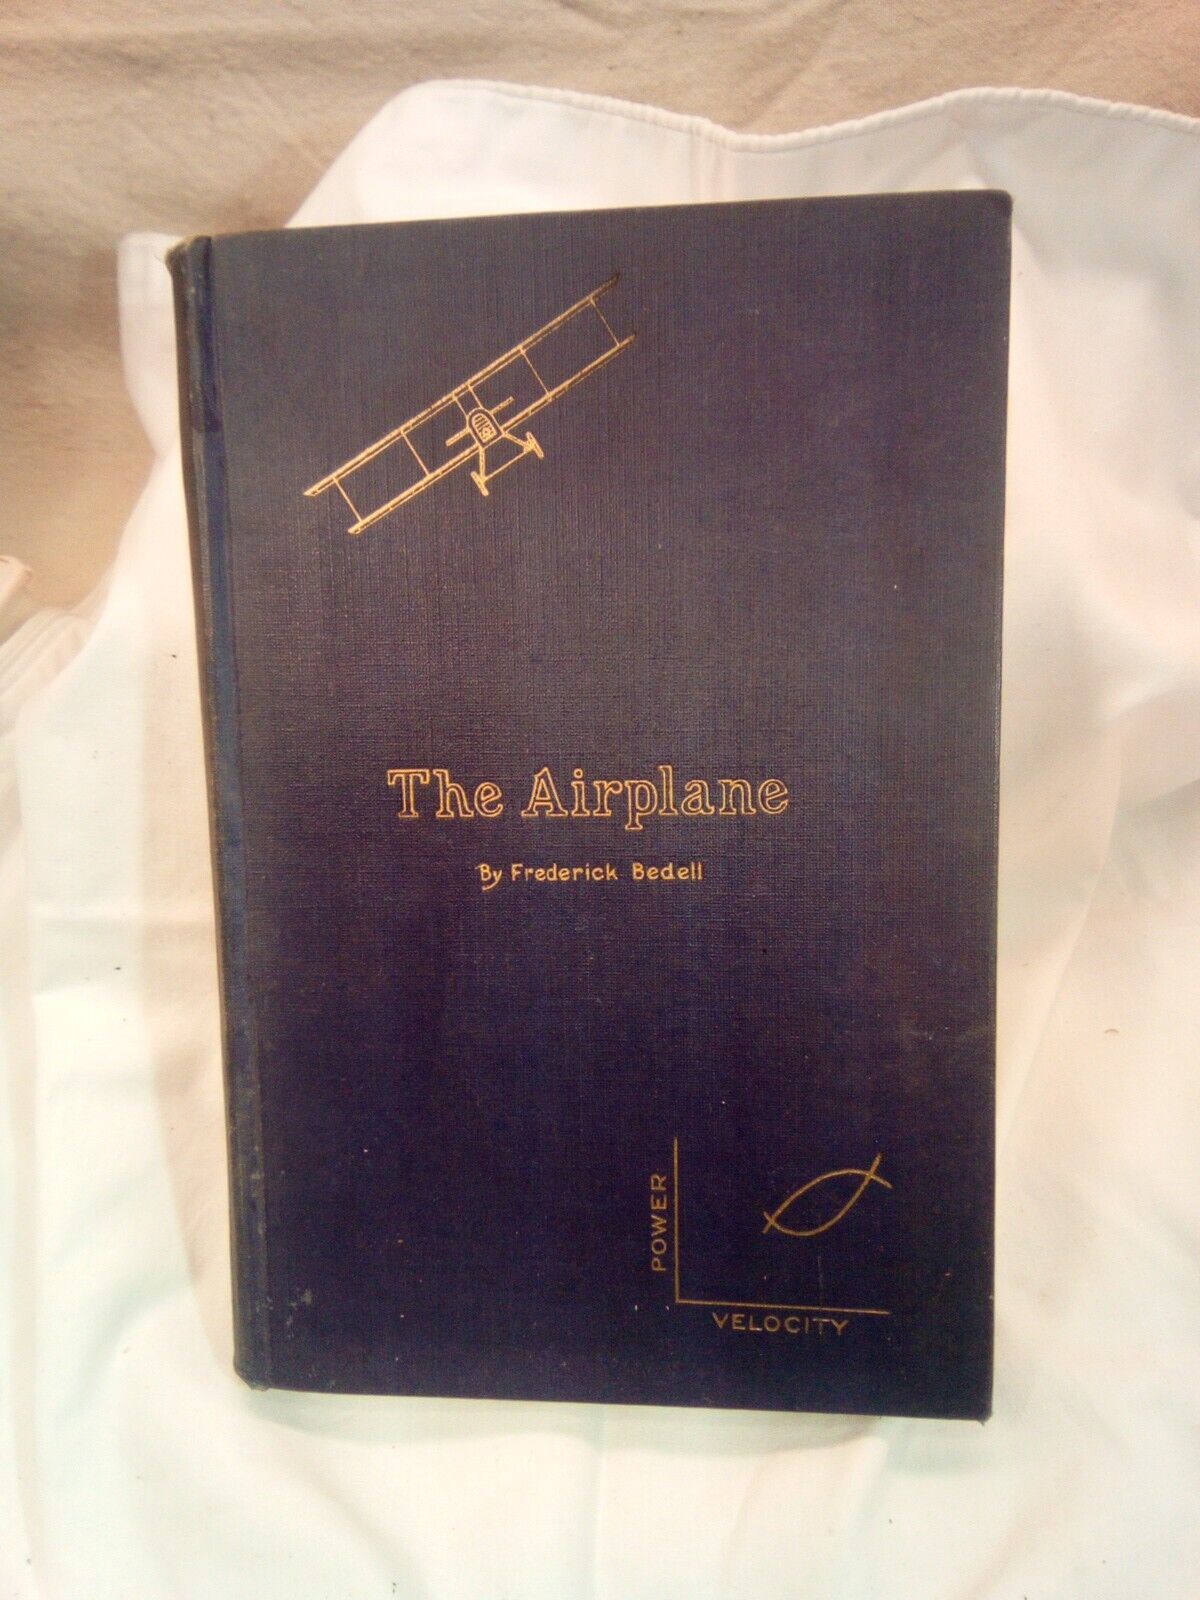 Vintage 1924 Edition of 